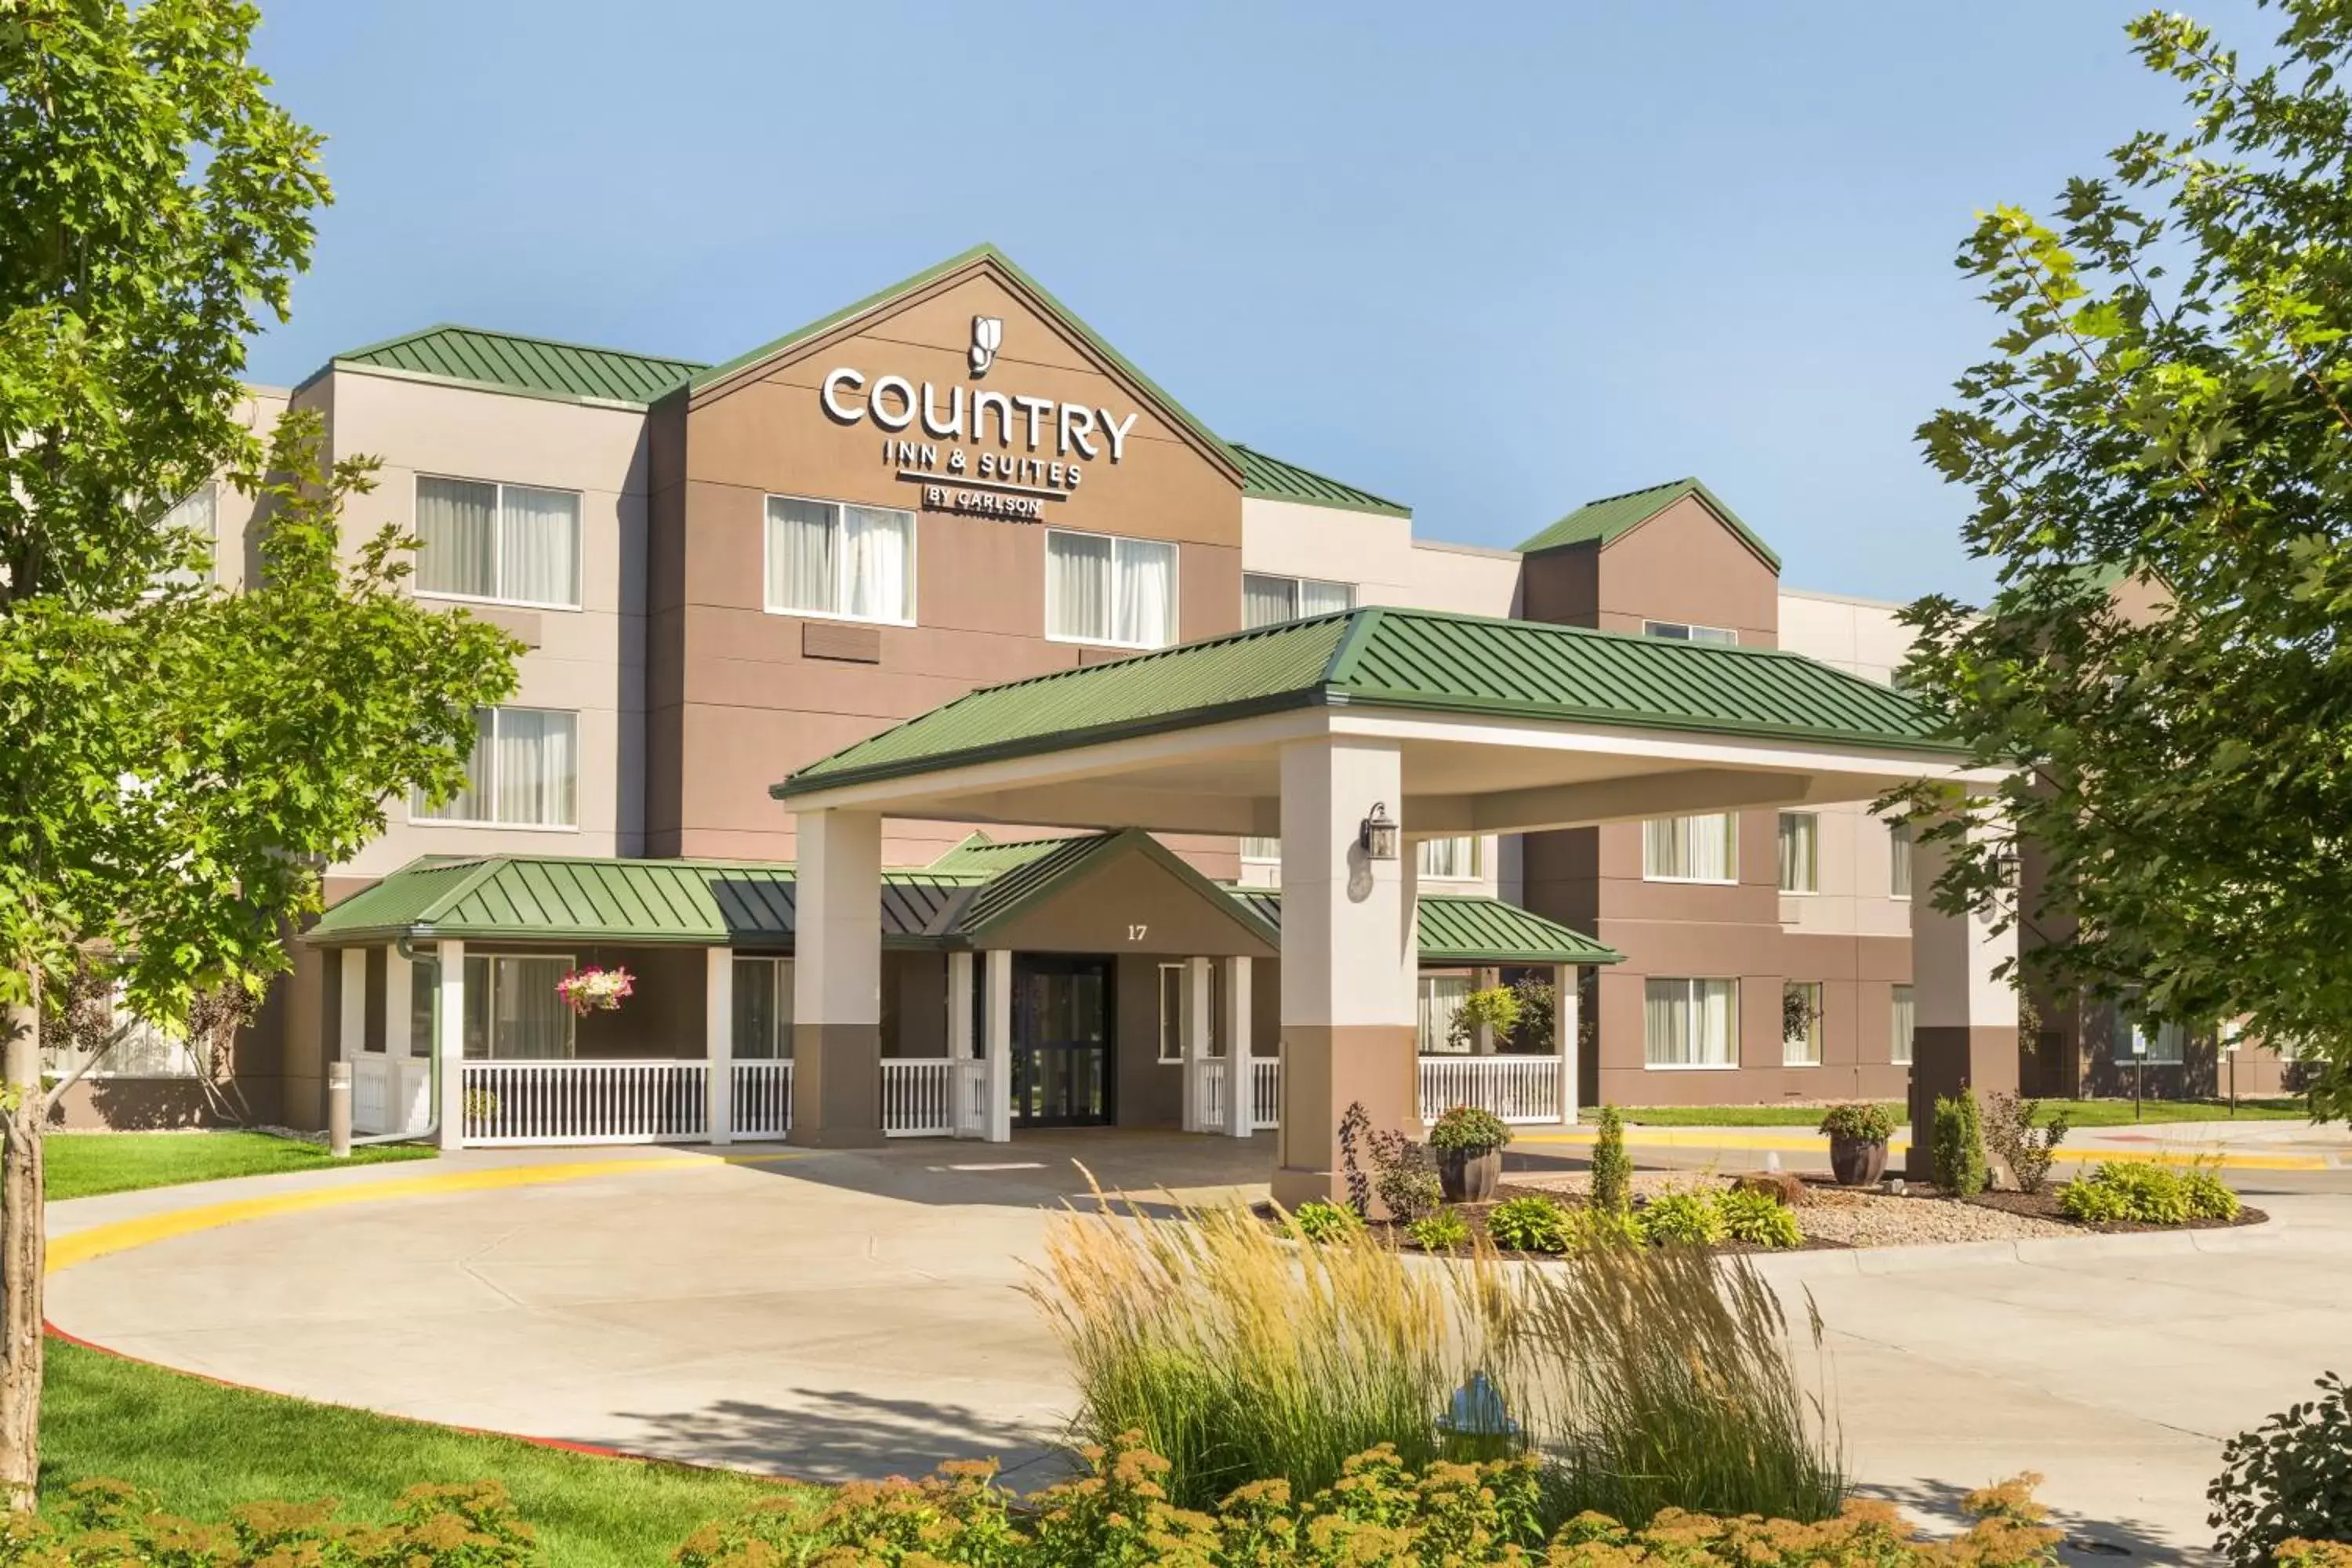 Facade/entrance, Property Building in Country Inn & Suites by Radisson, Council Bluffs, IA